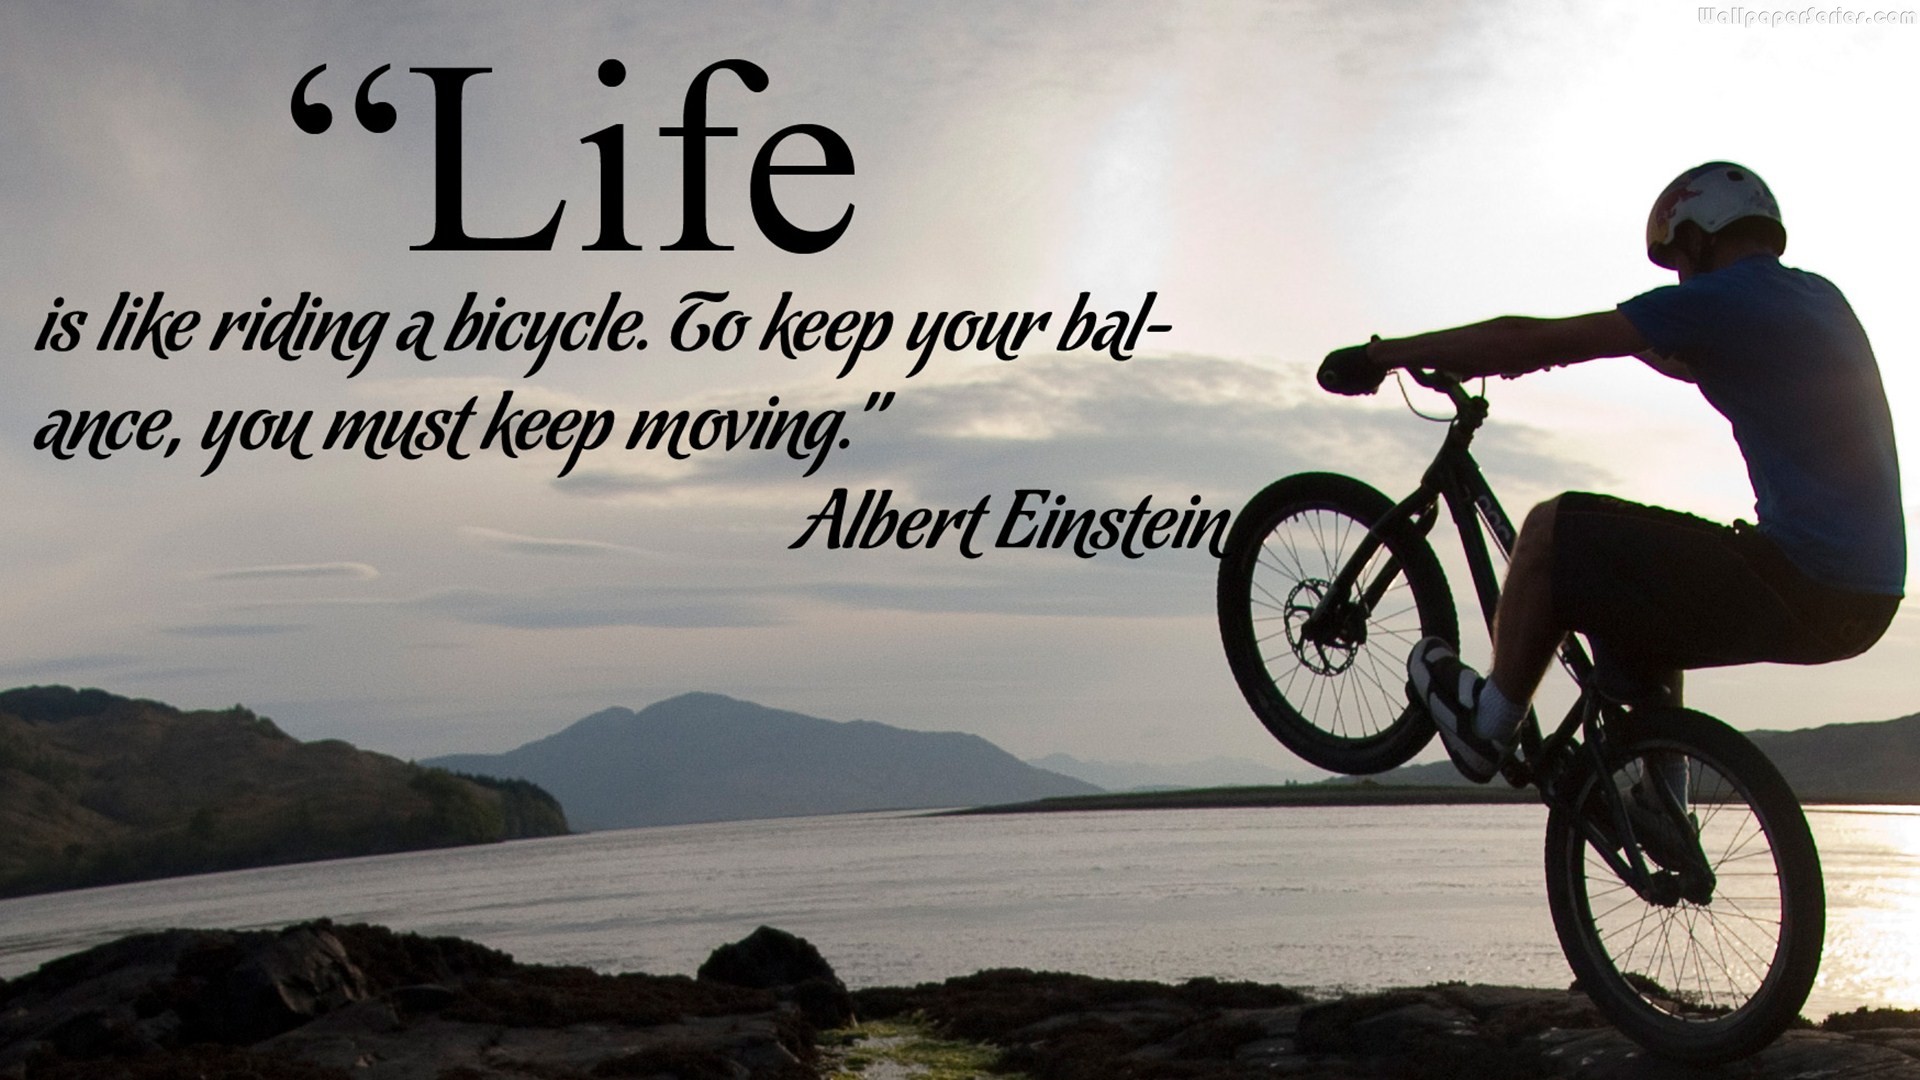 Ride Bicycle Life Quotes Wallpaper 